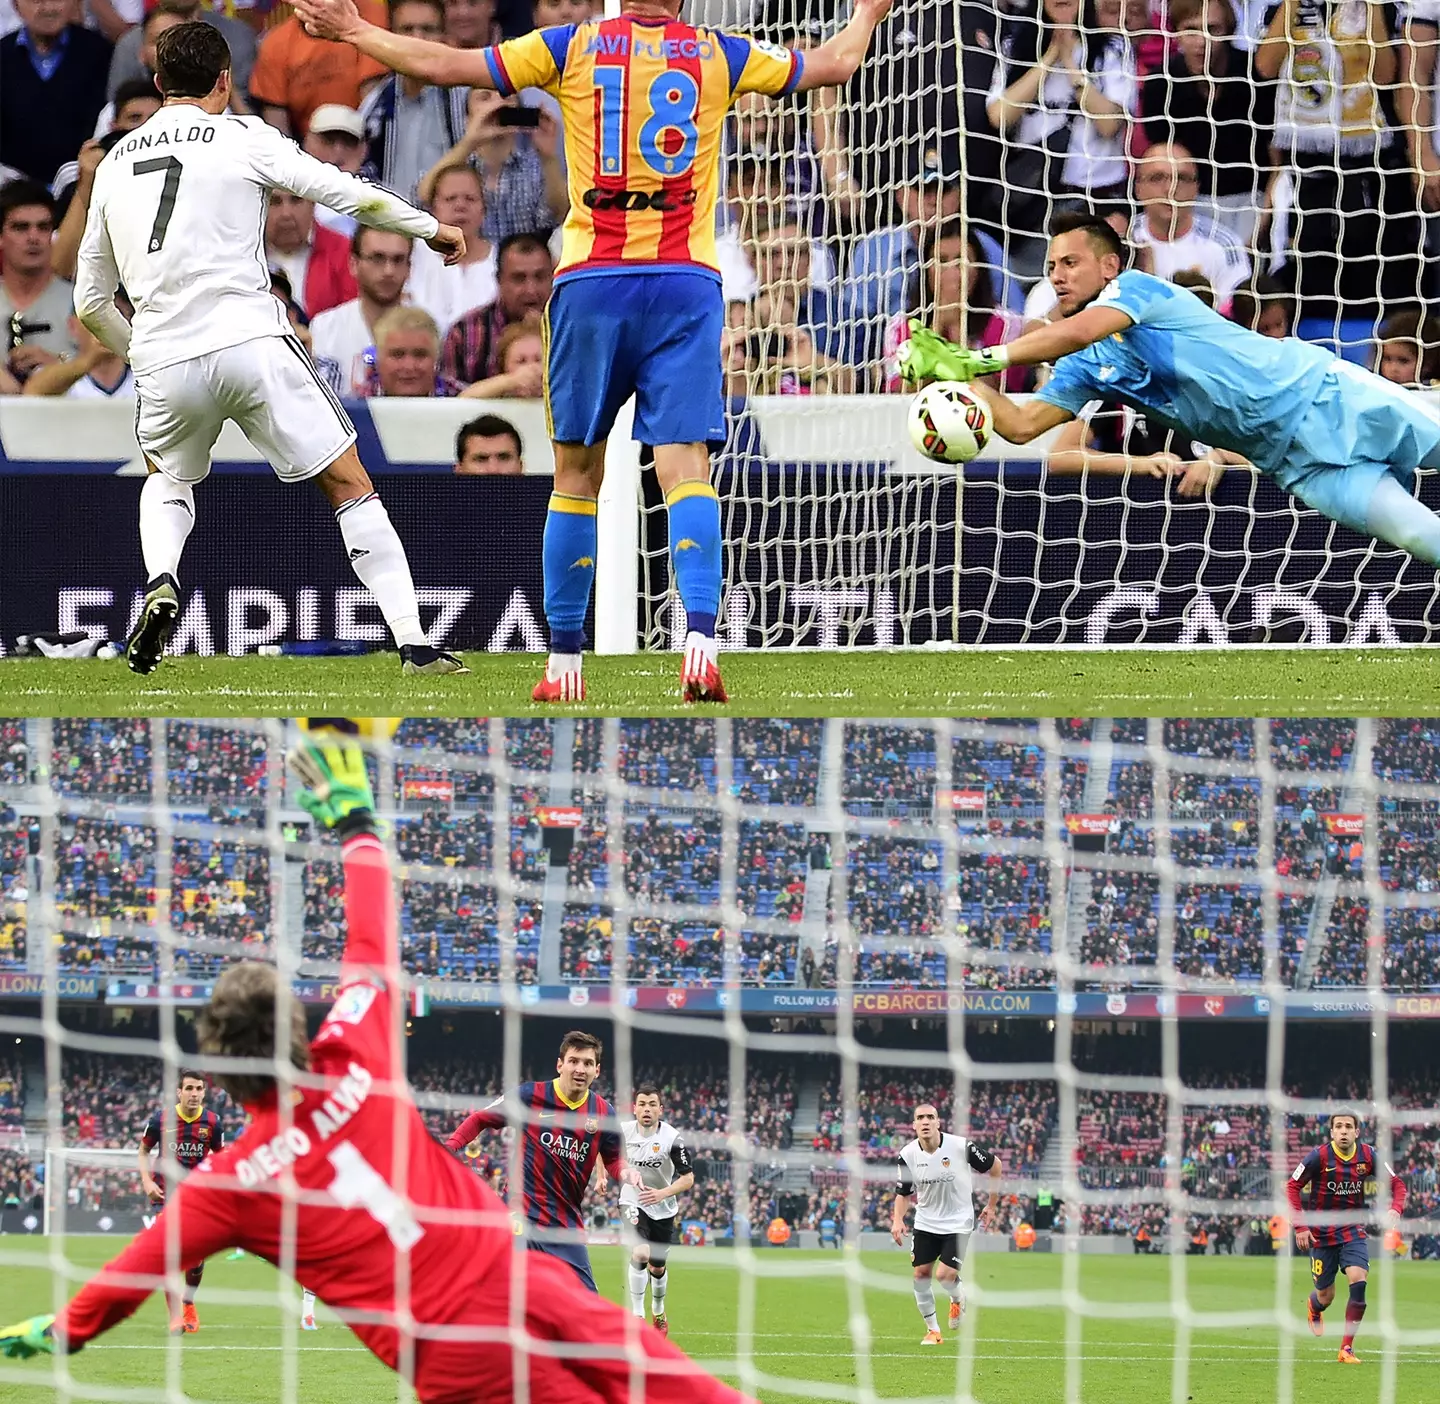 Diego Alves saved penalties from both Lionel Messi and Cristiano Ronaldo (Getty)